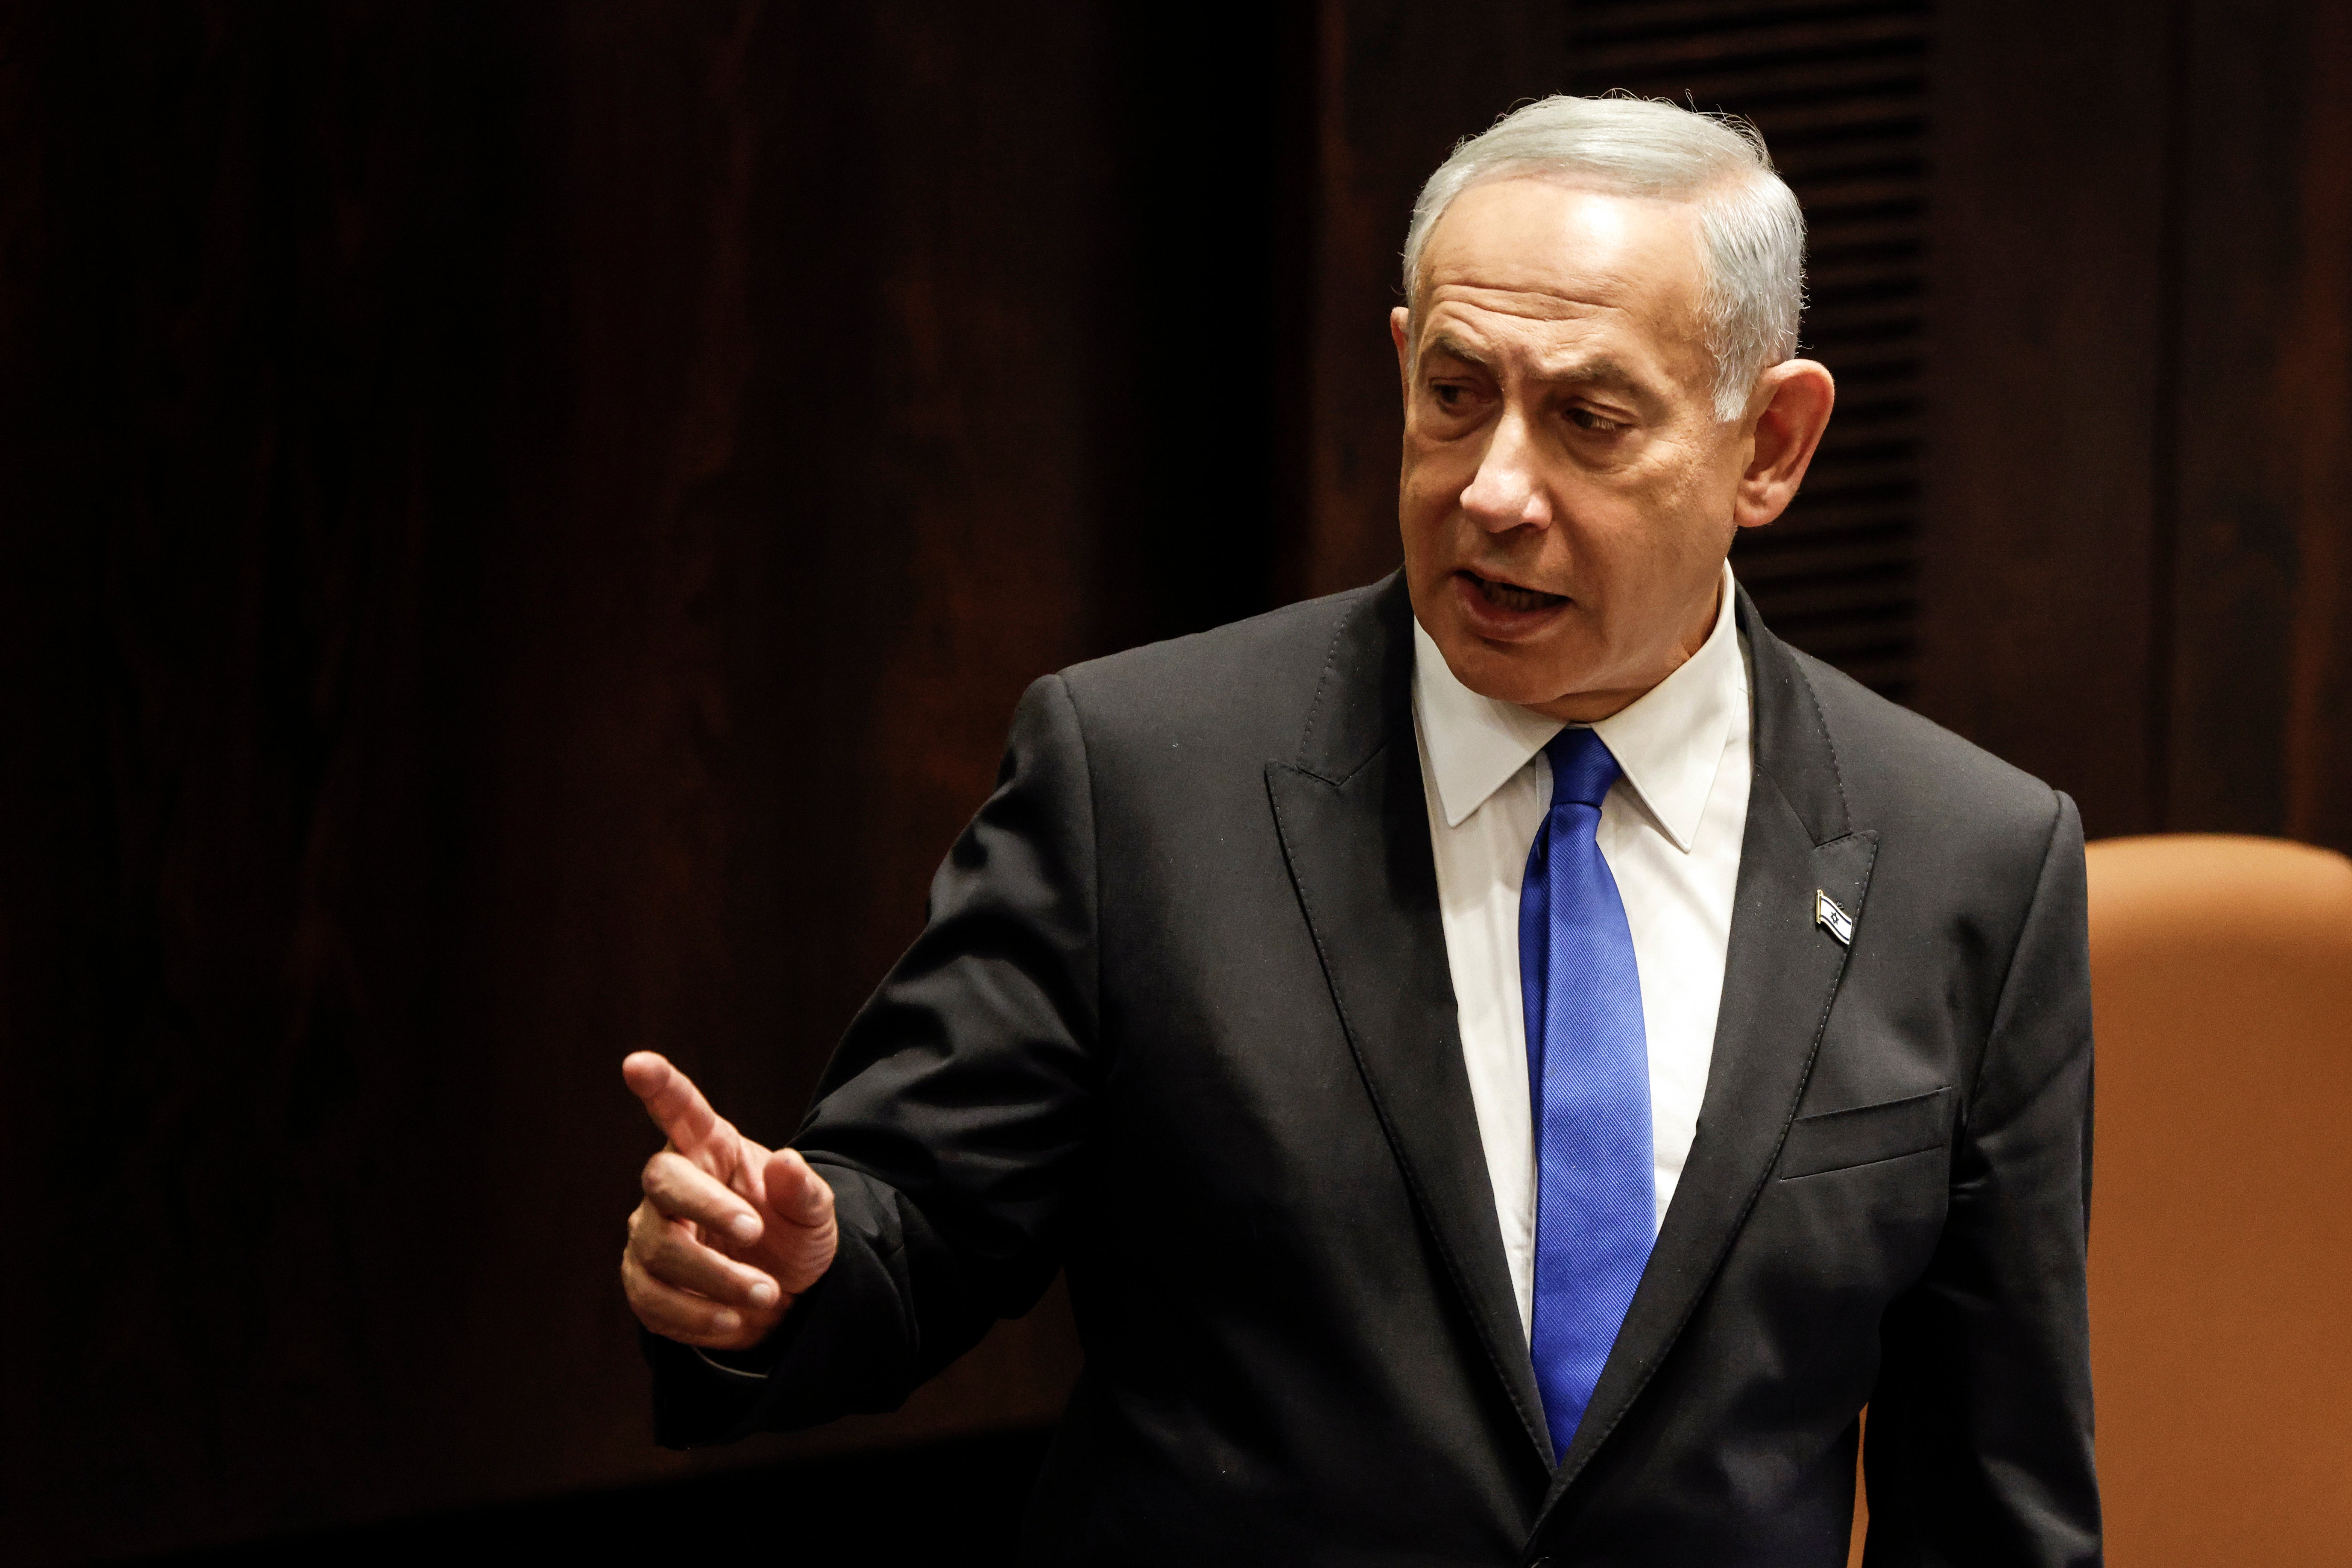 The Israeli PM has provoked criticism from home and abroad to his plans